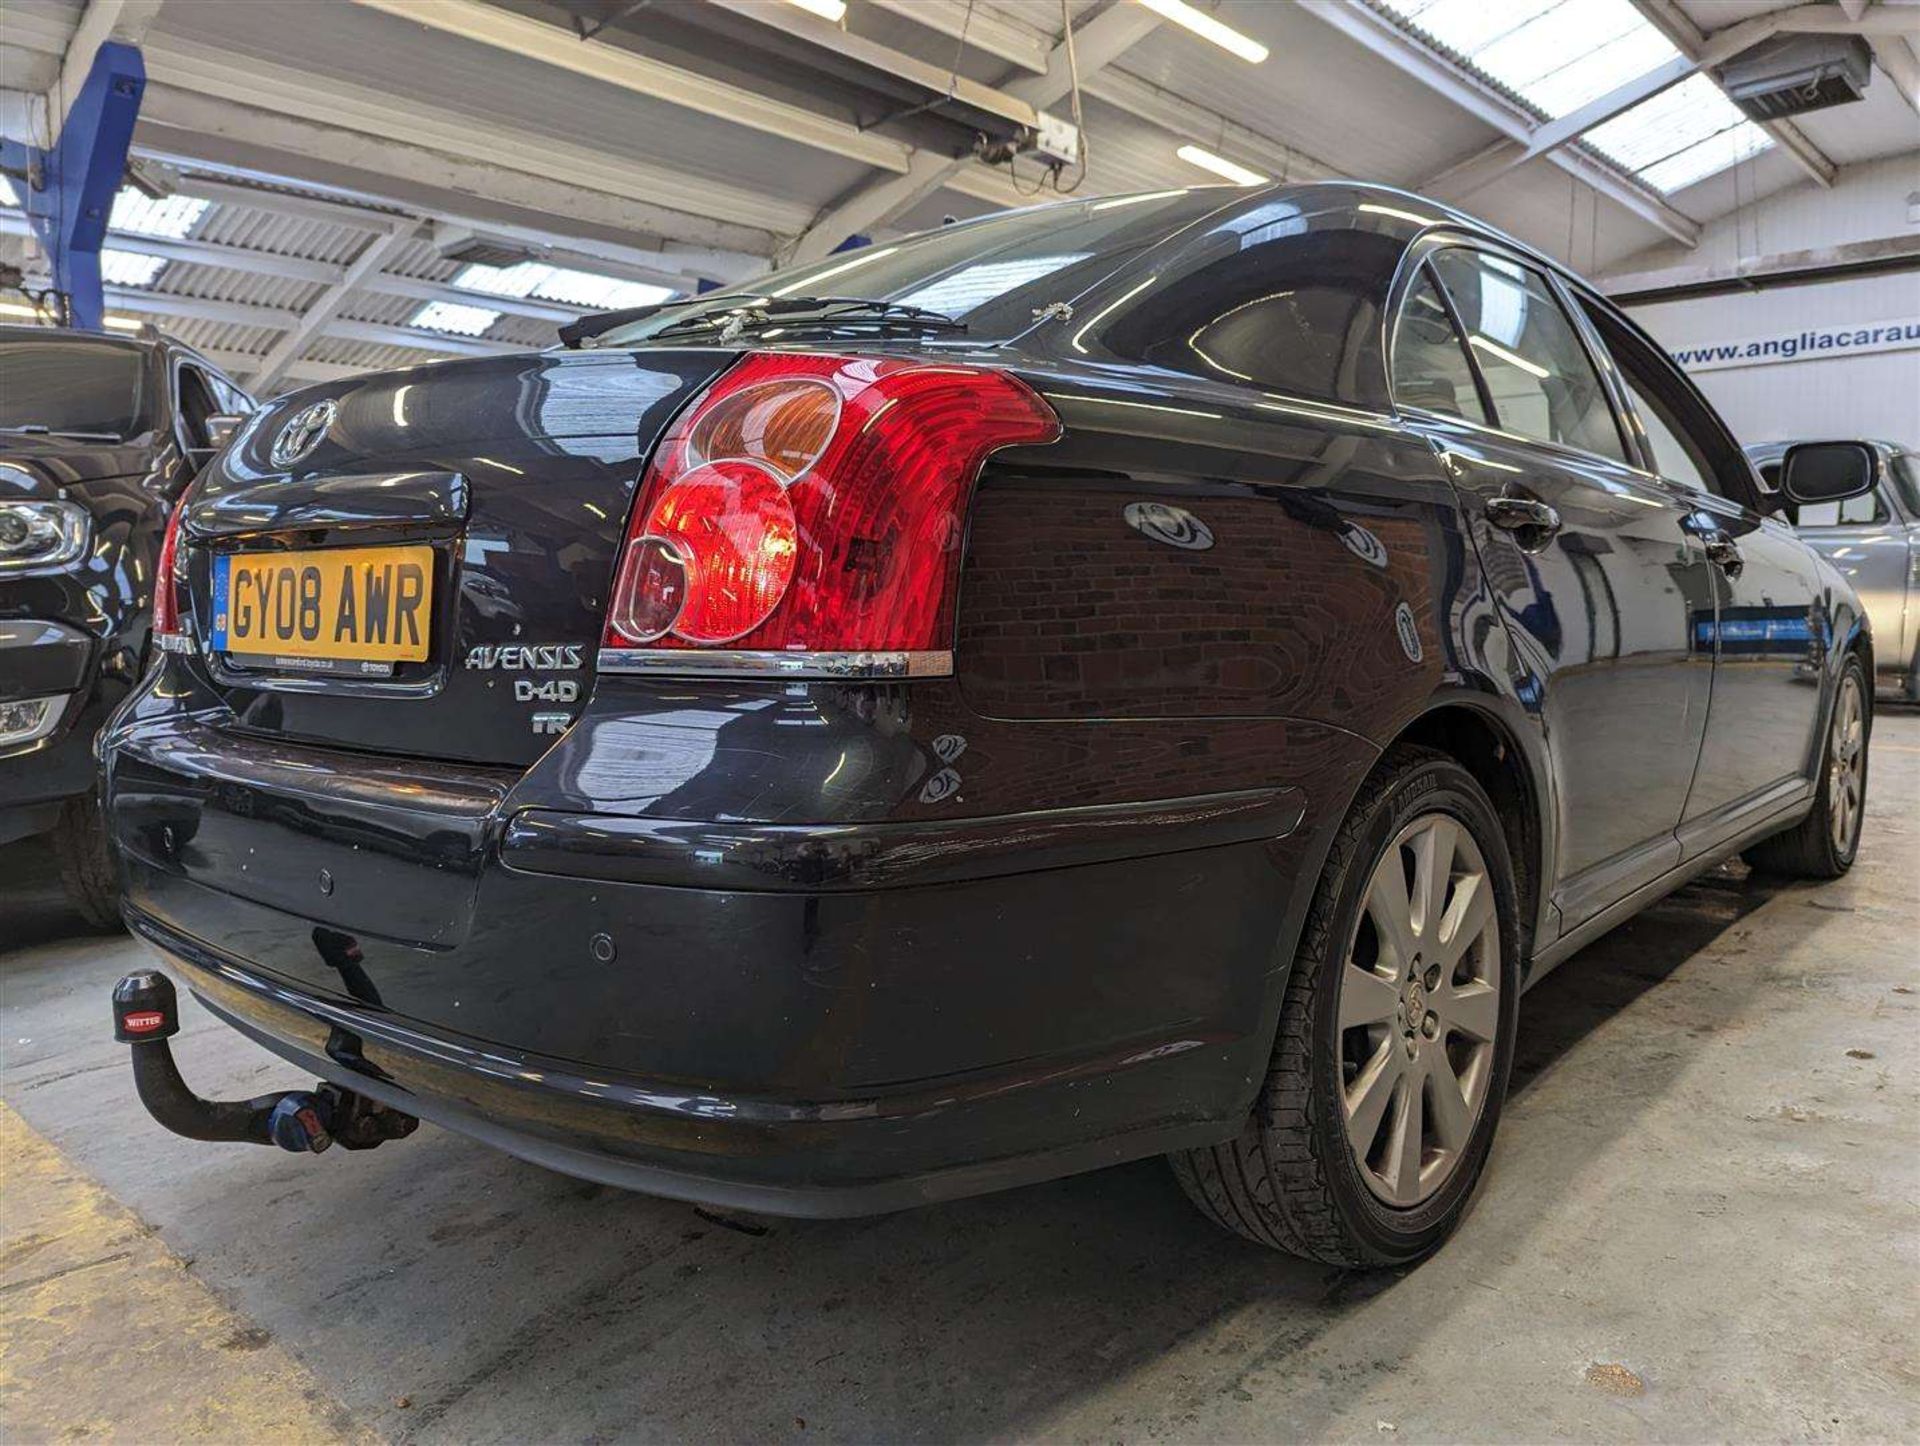 2008 TOYOTA AVENSIS TR D-4D - Image 6 of 26